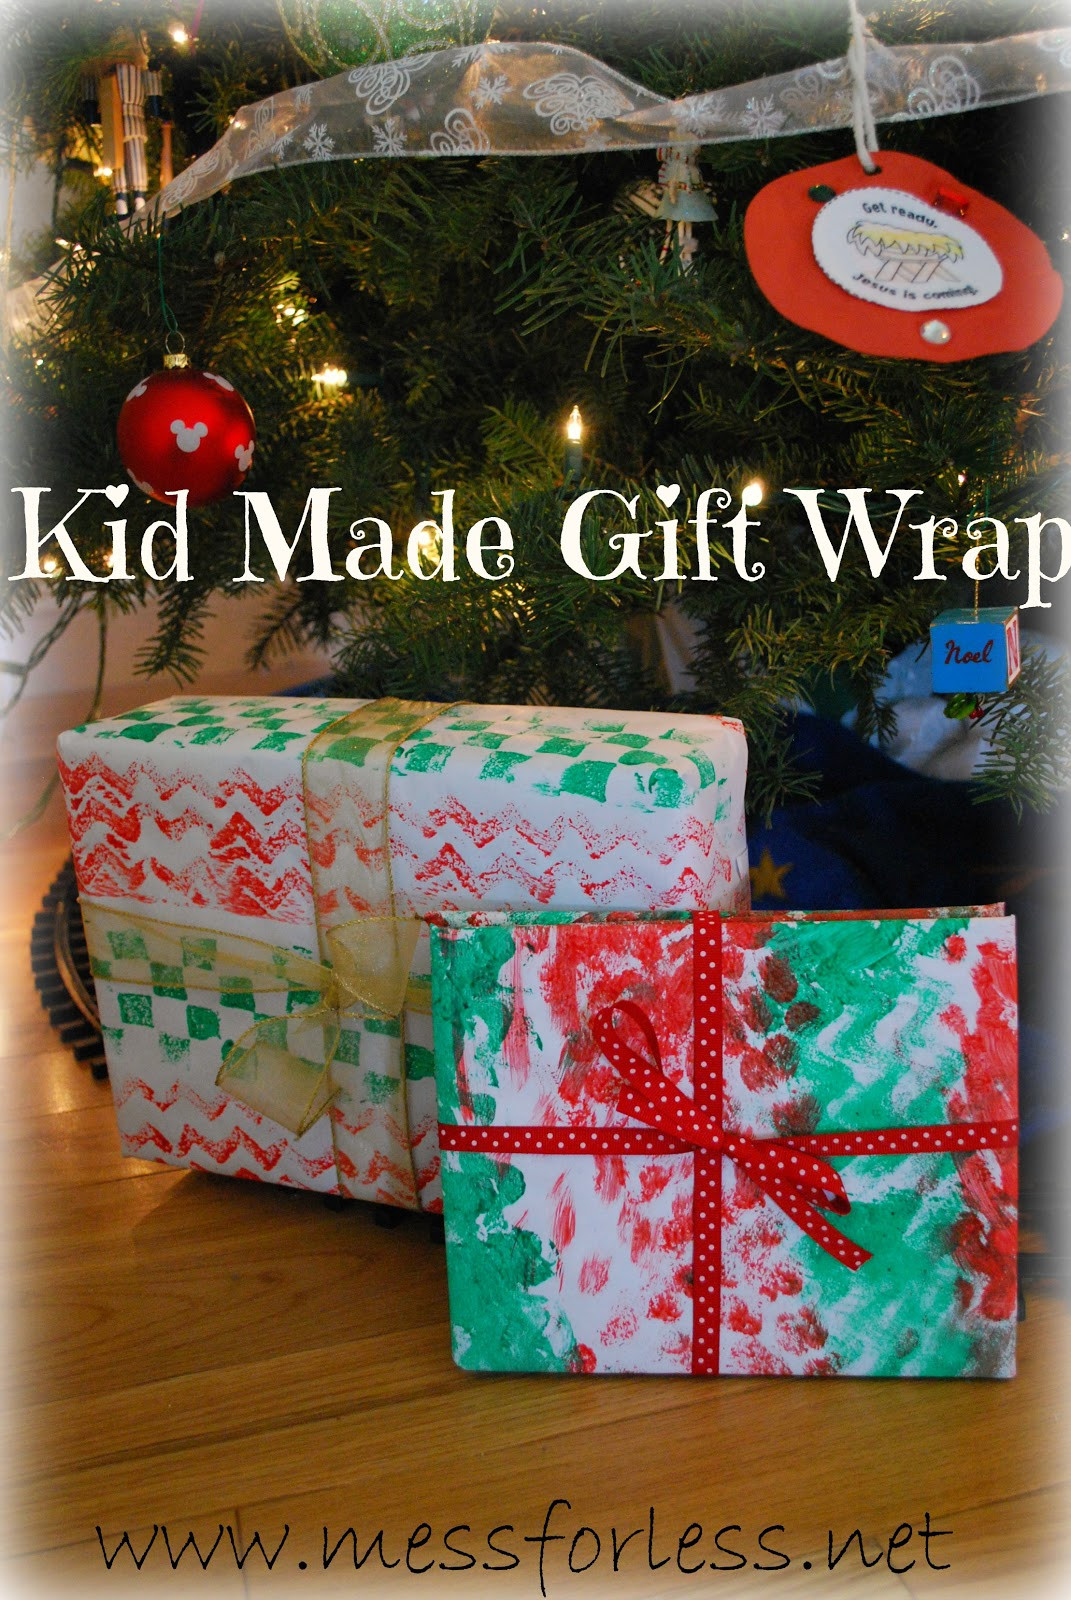 Art Gift For Kids
 Kid Made Gift Wrap Mess for Less